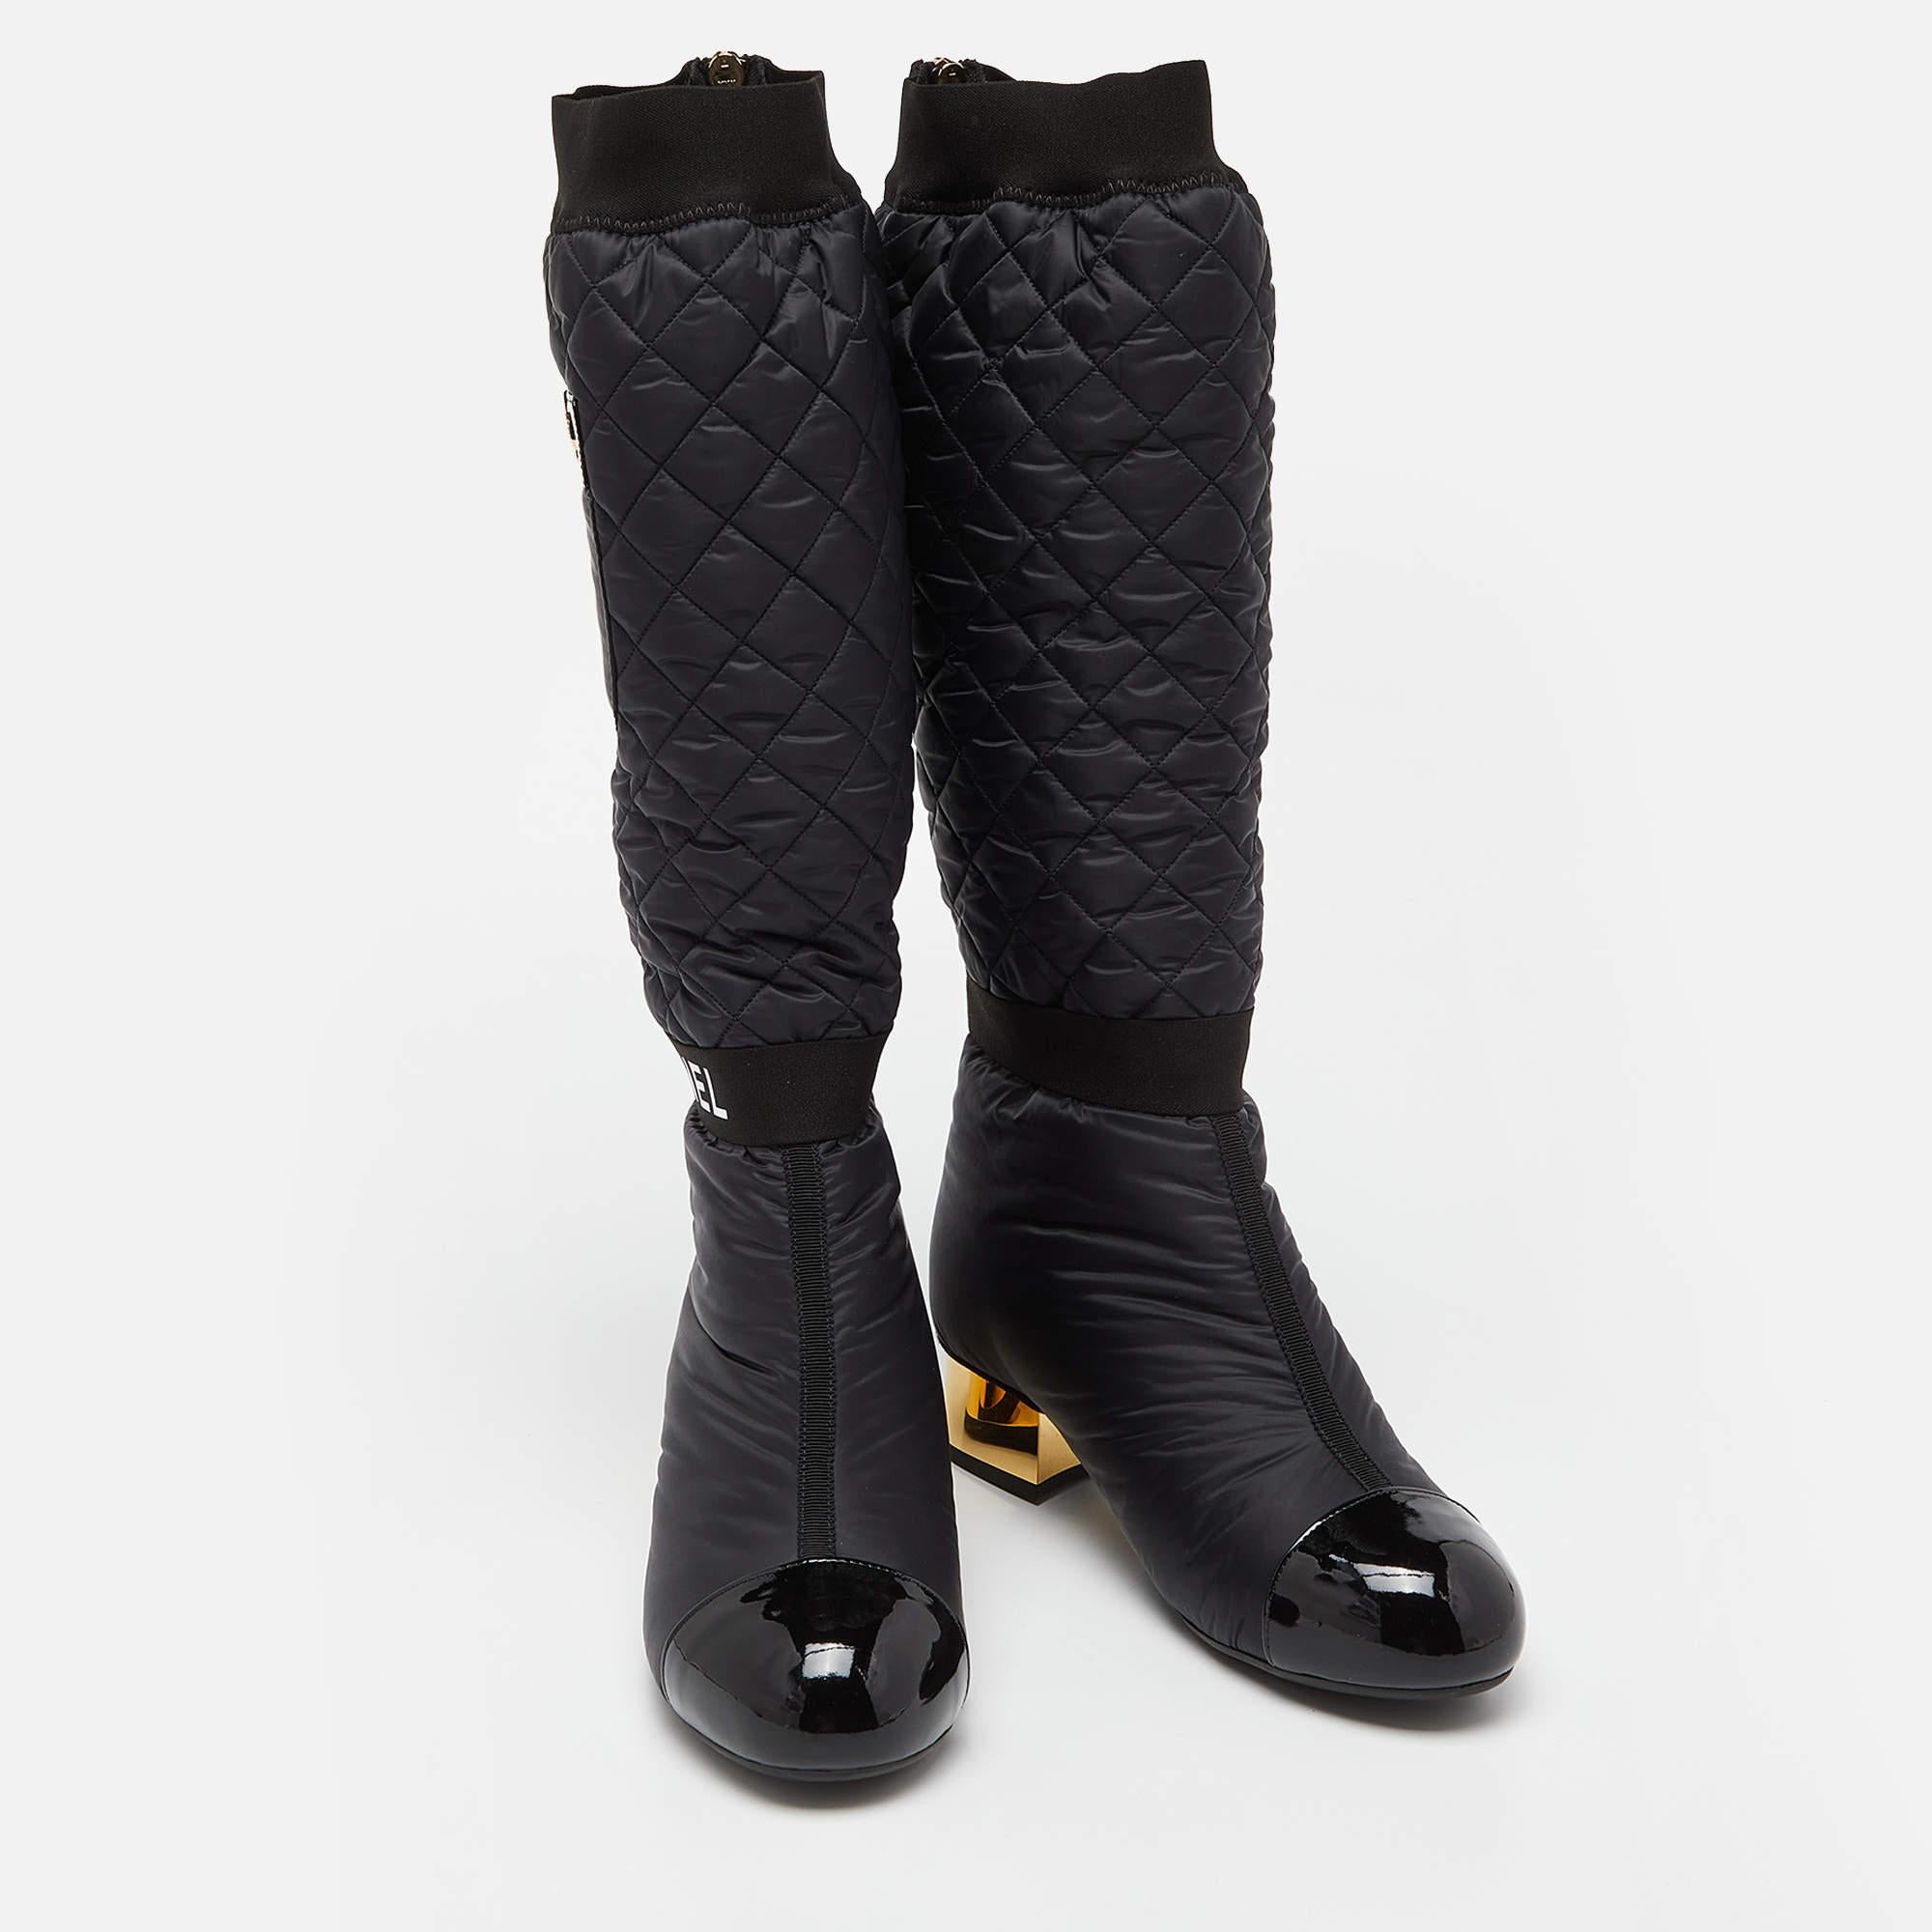 Women's Chanel Black Nylon and Patent Leather Interlocking CC Knee High Sock Boots Size 